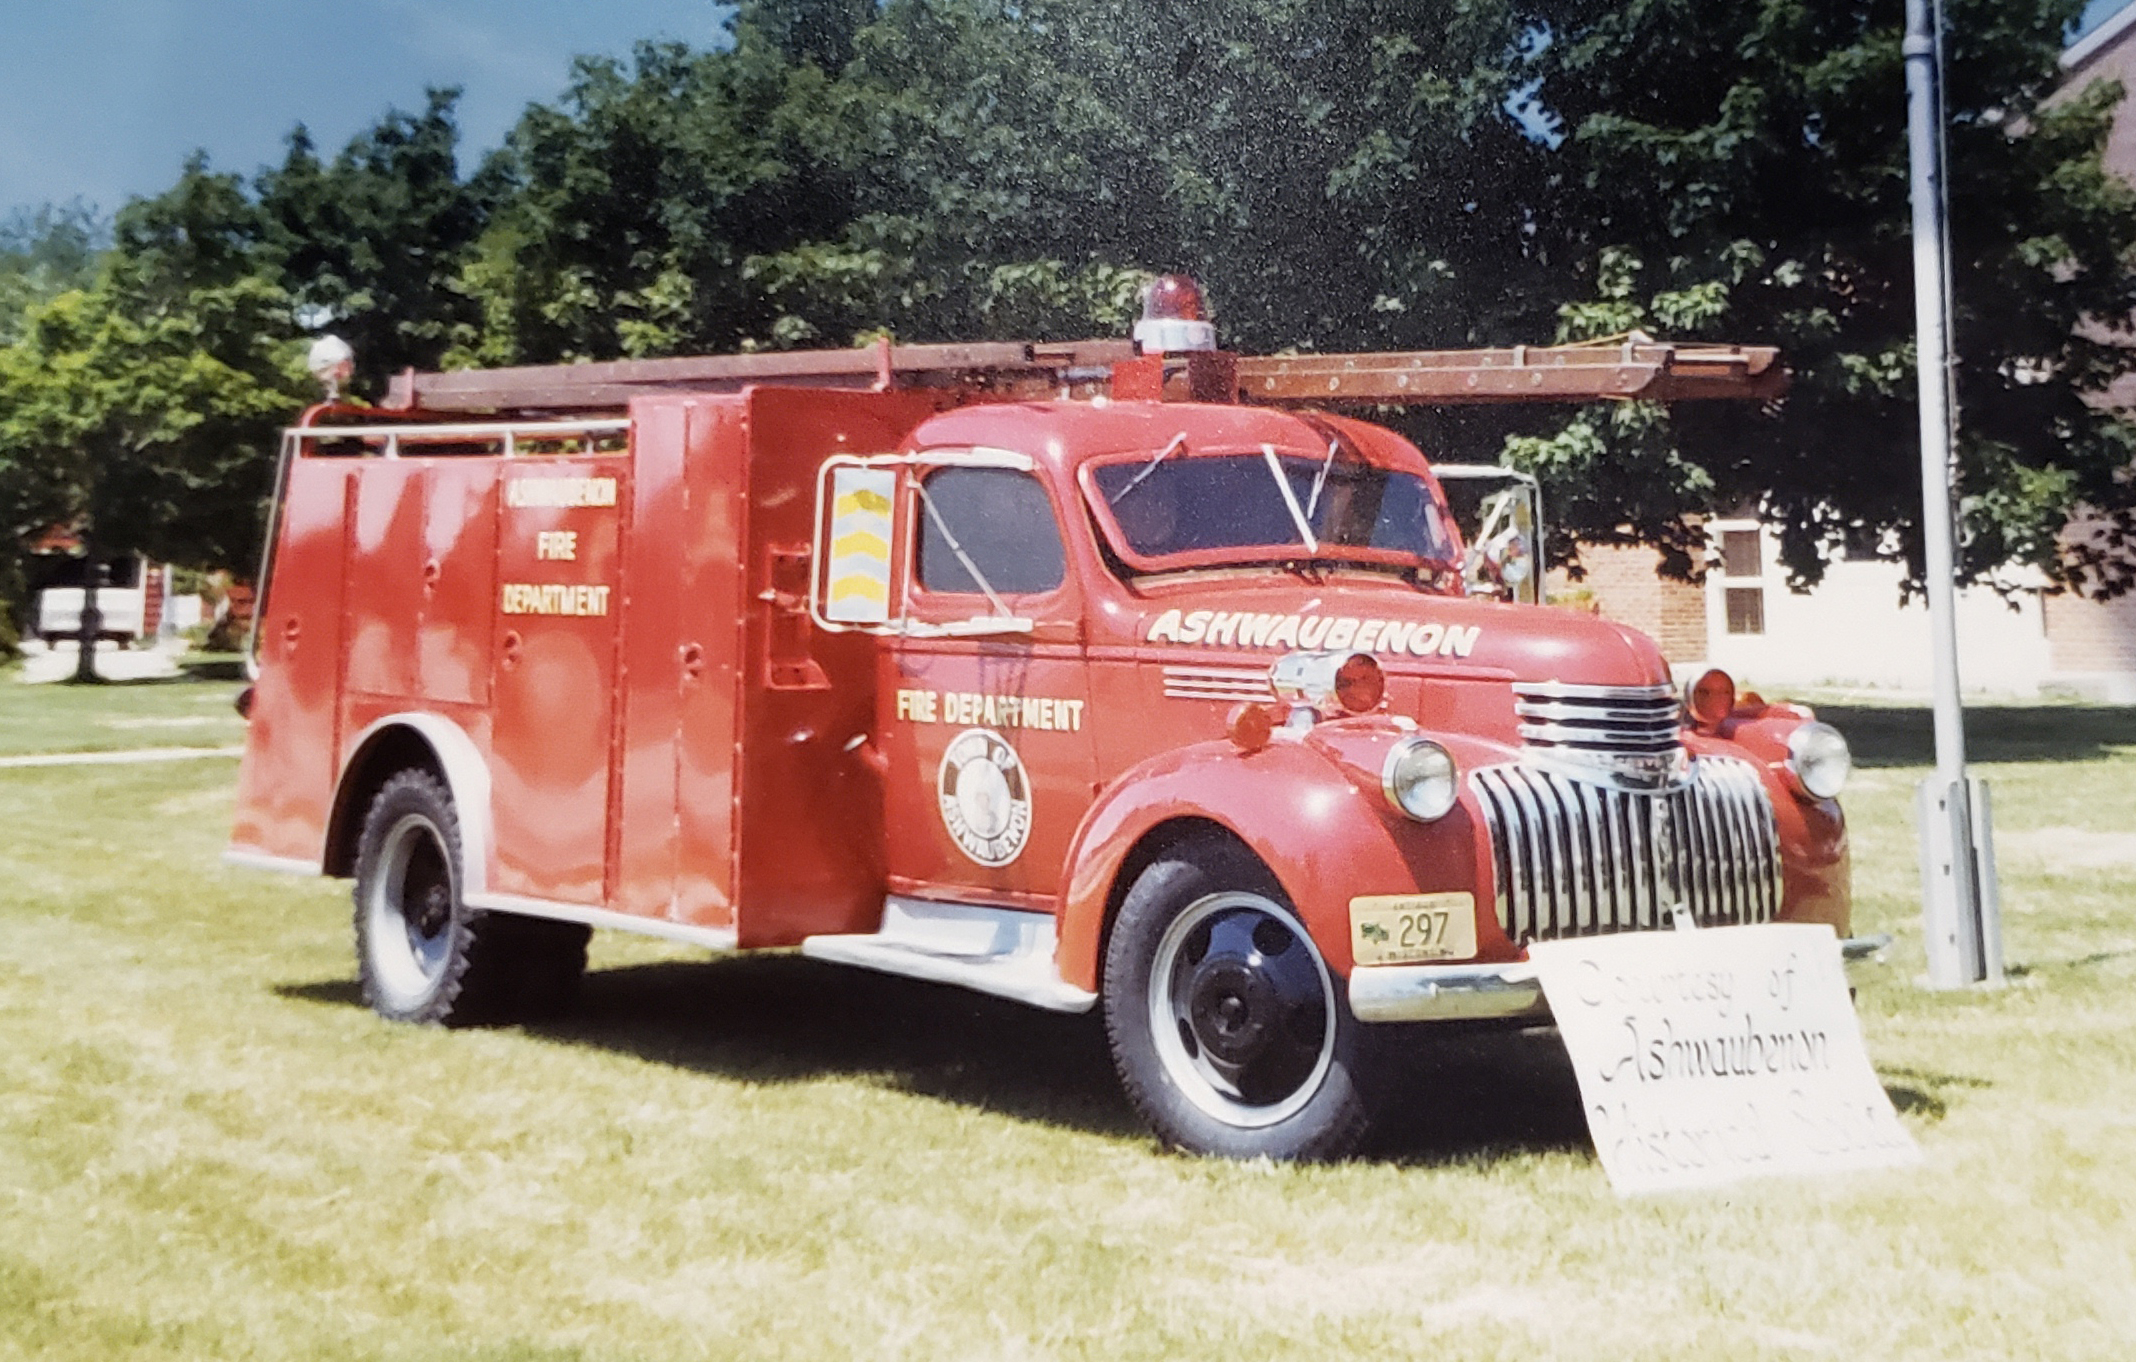 Historical society aims to increase fundraising with vintage fire engine